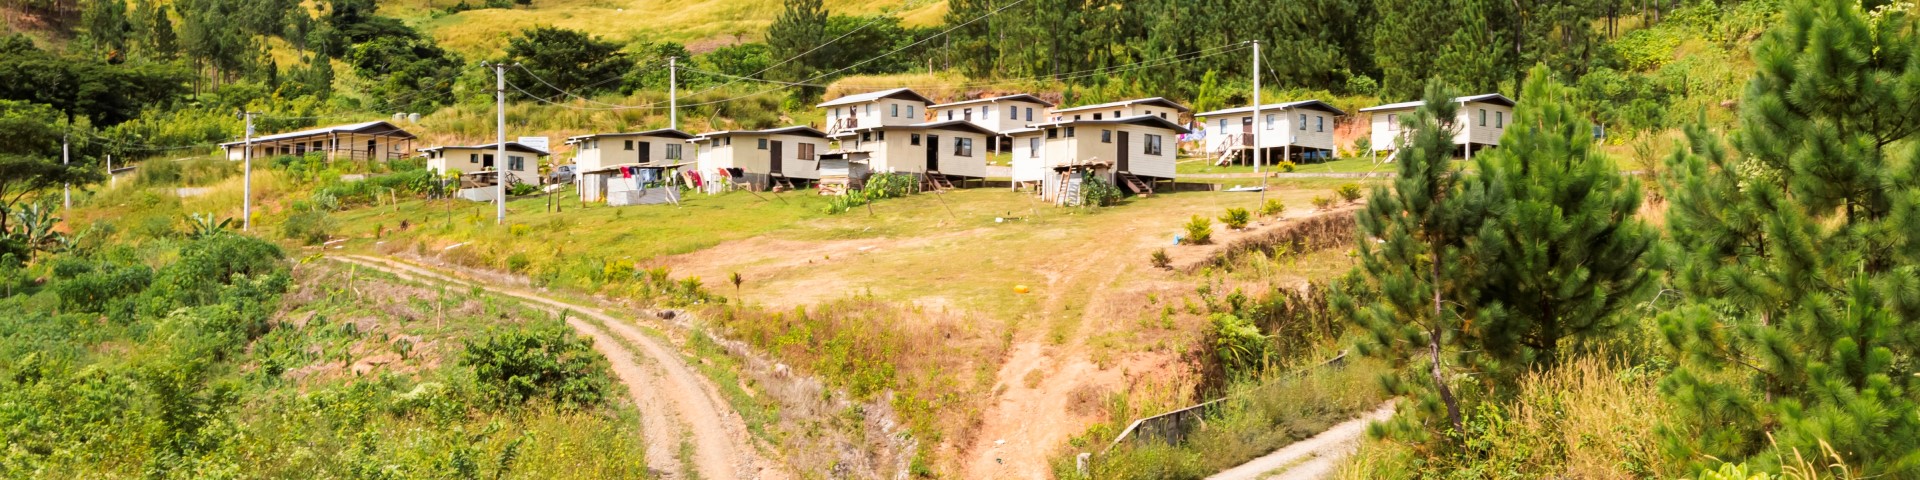 A village comprising a small group of houses was relocated and now stands on a mountainside.